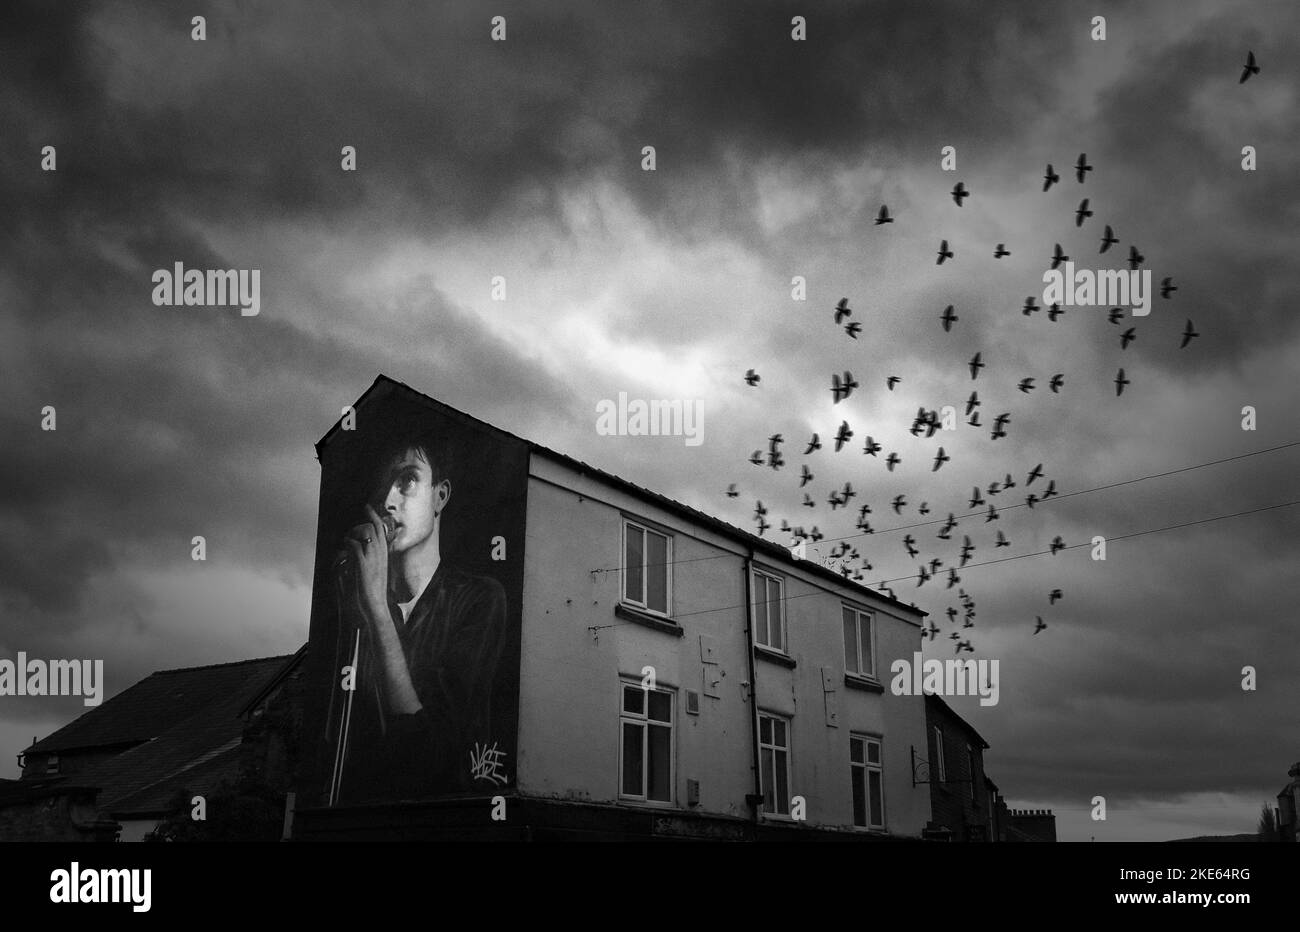 Mill Street, Macclesfield, Cheshire, England, UK,SK11 6NN, Ian Kevin Curtis, singer of Joy Division mural by Akse plus murmuration of birds Stock Photo